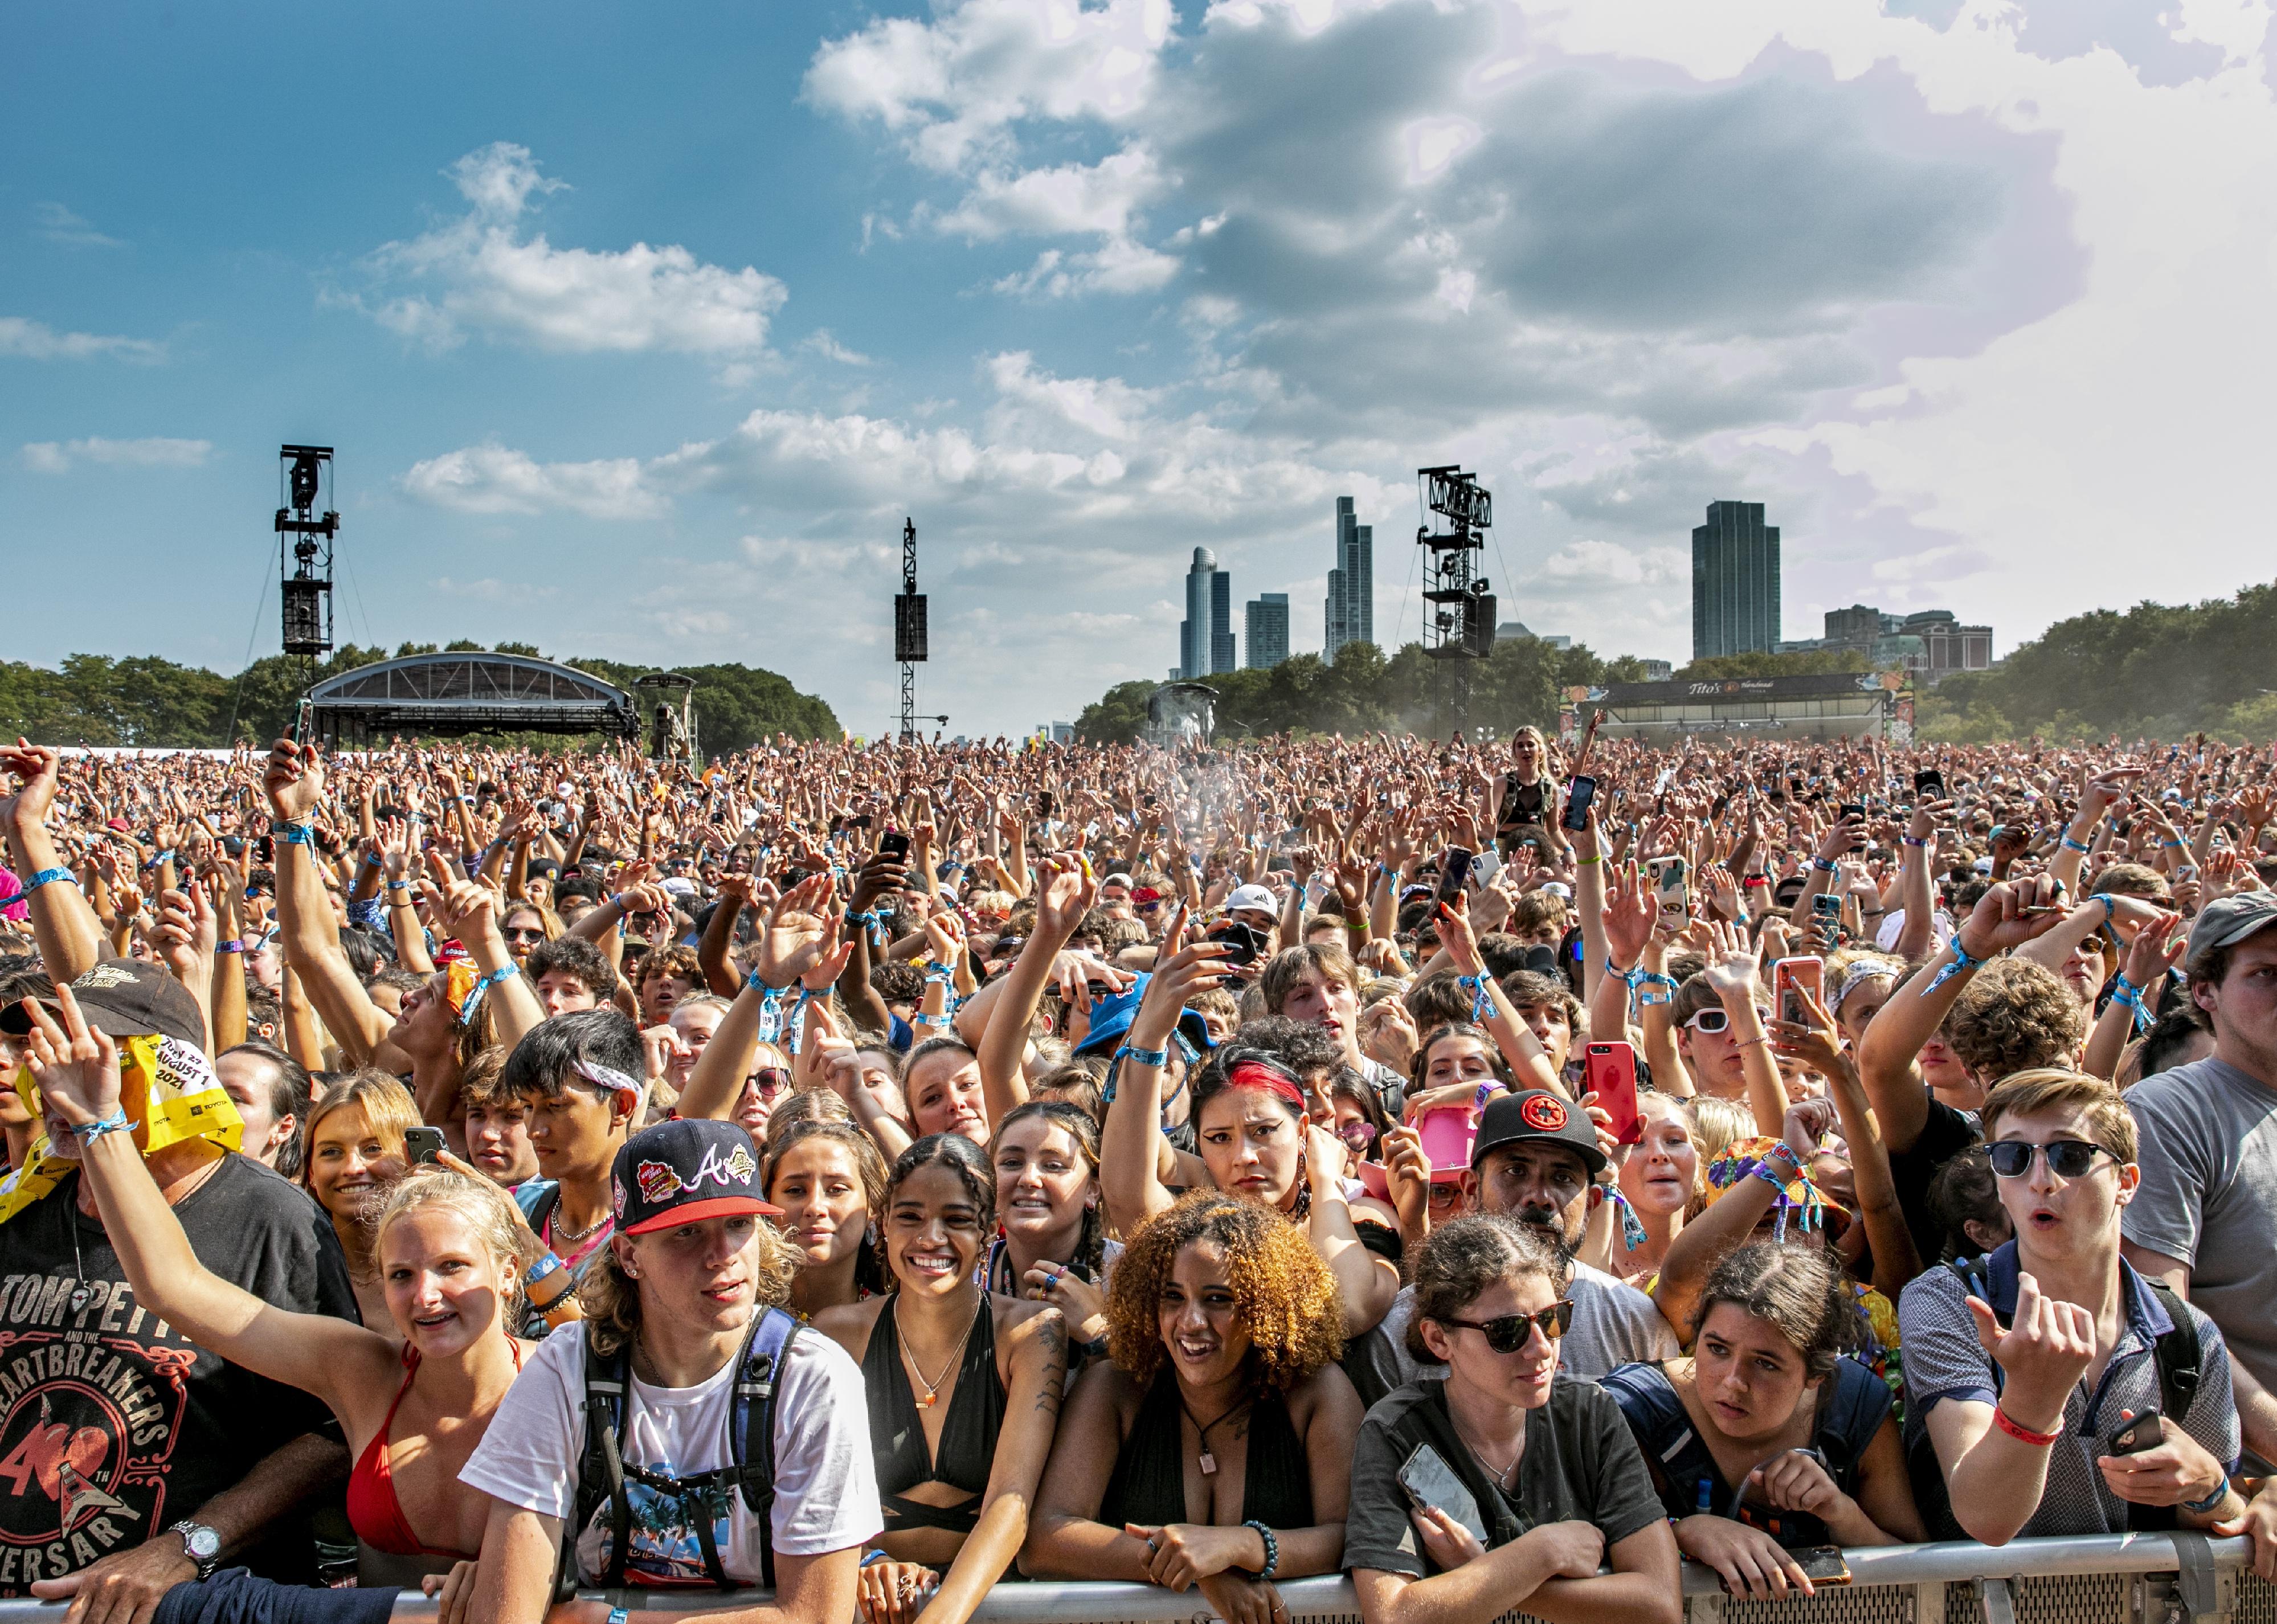 Festival-goers attend Lollapalooza at Grant Park in Chicago.